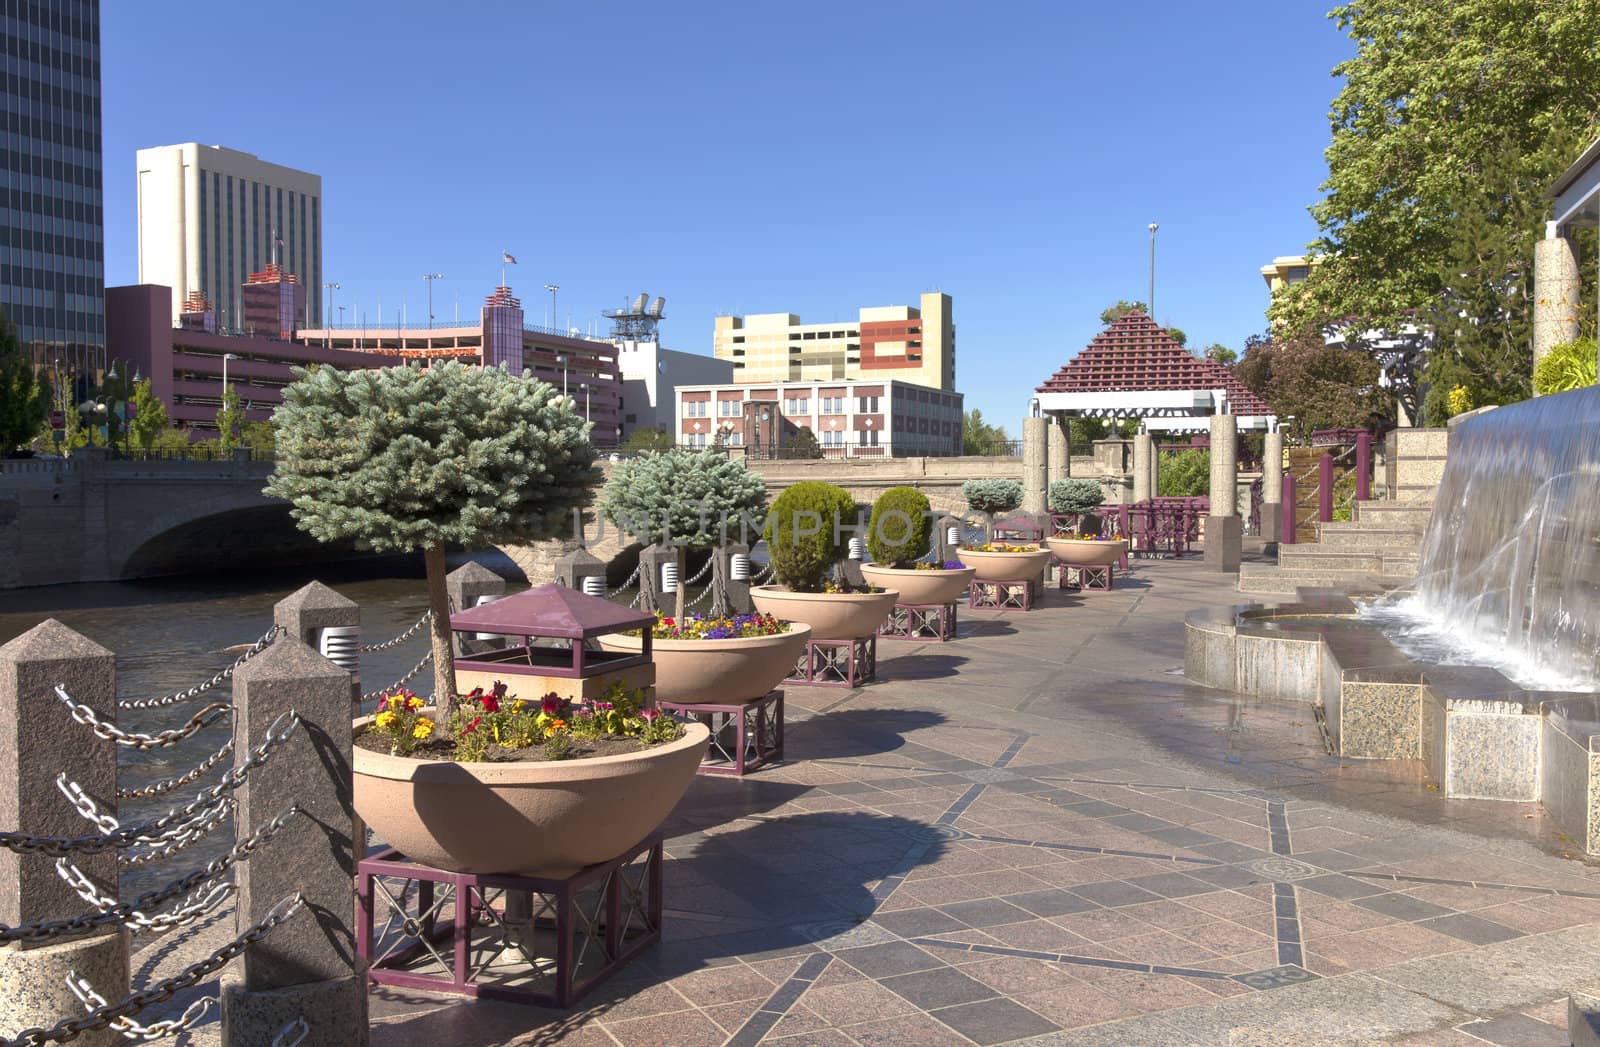 Downtown Reno promenade and park. by Rigucci